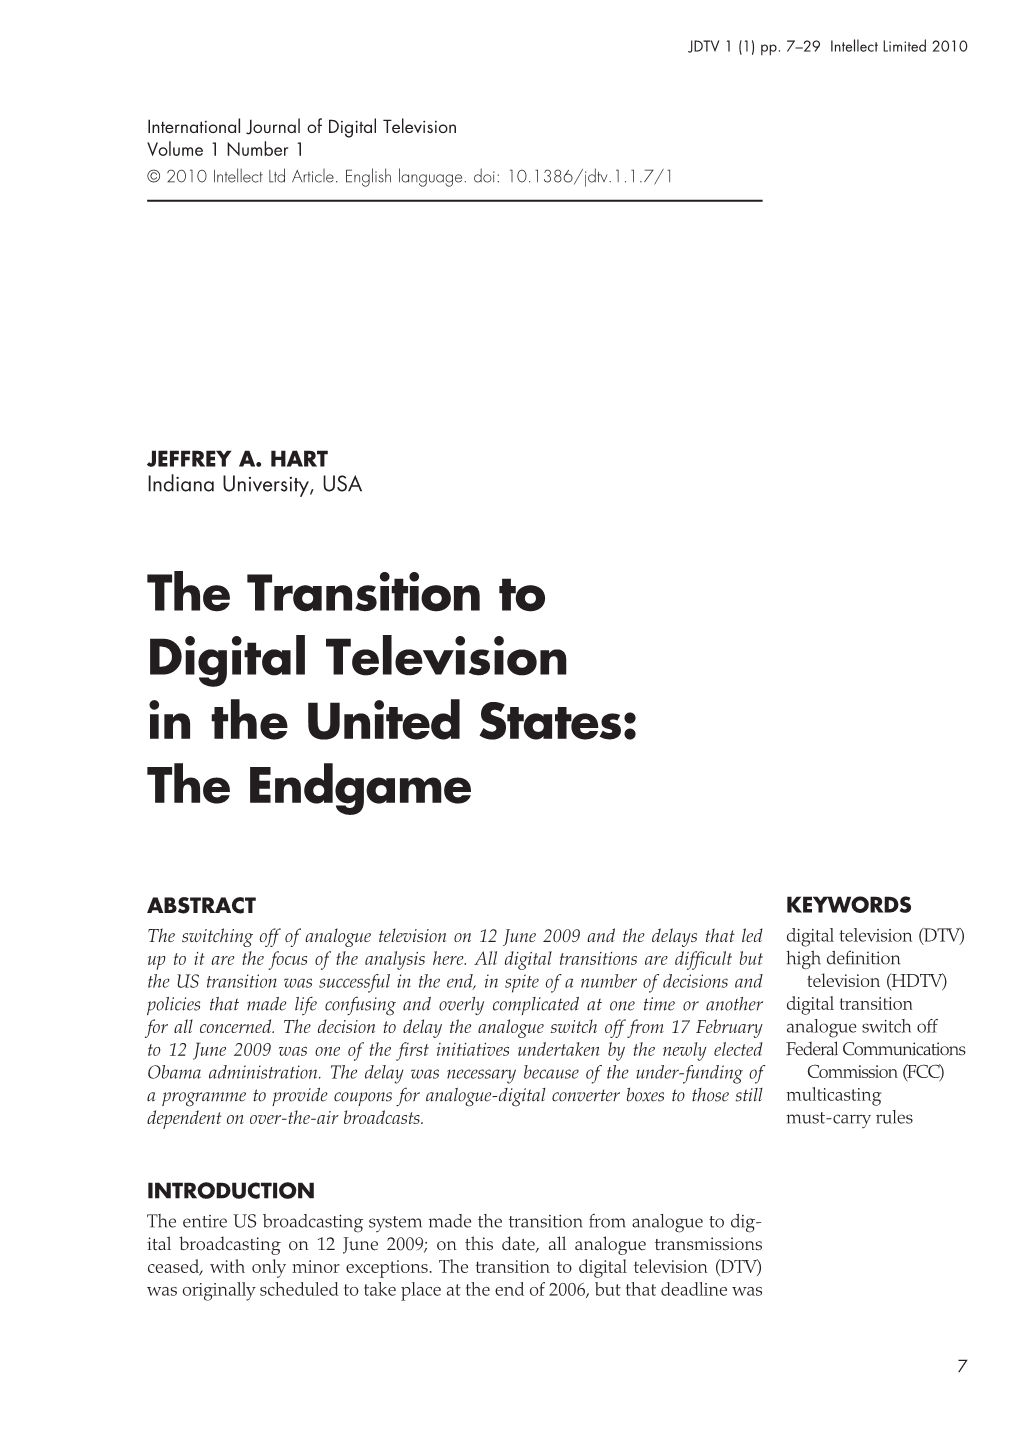 The Transition to Digital Television in the United States: the Endgame